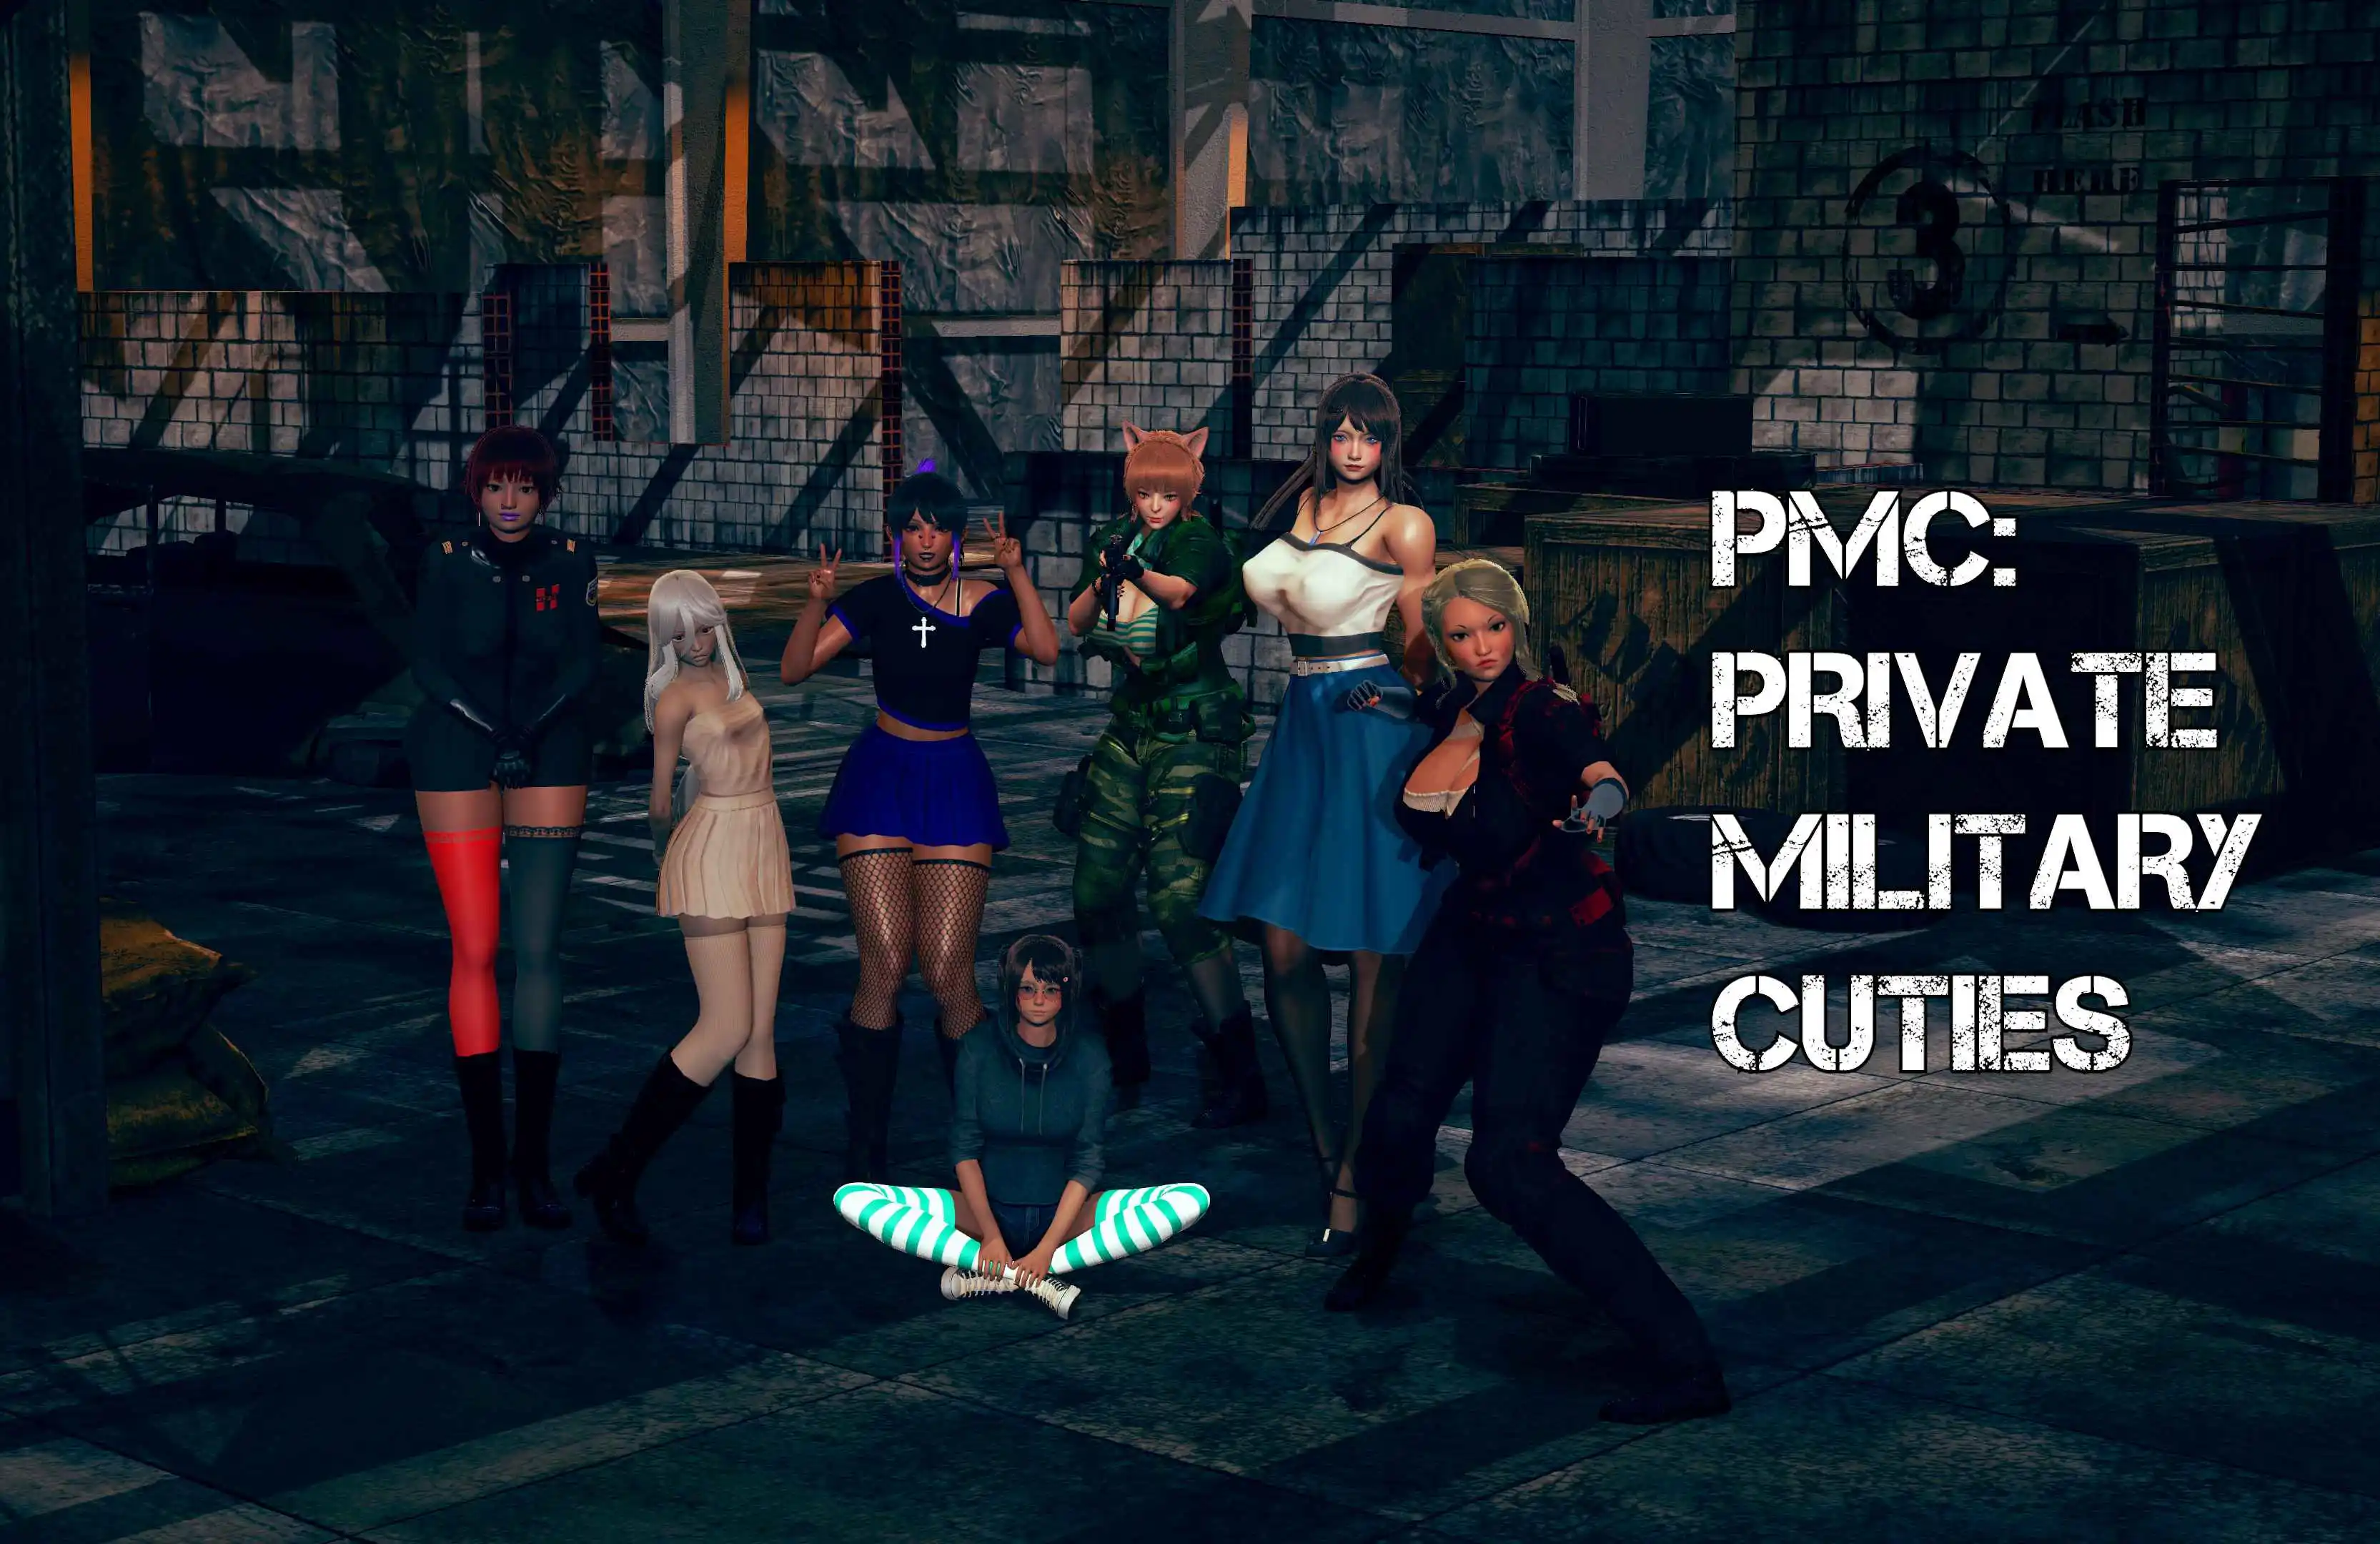 PMC: Private Military Cuties [v0.1 Teaser] main image